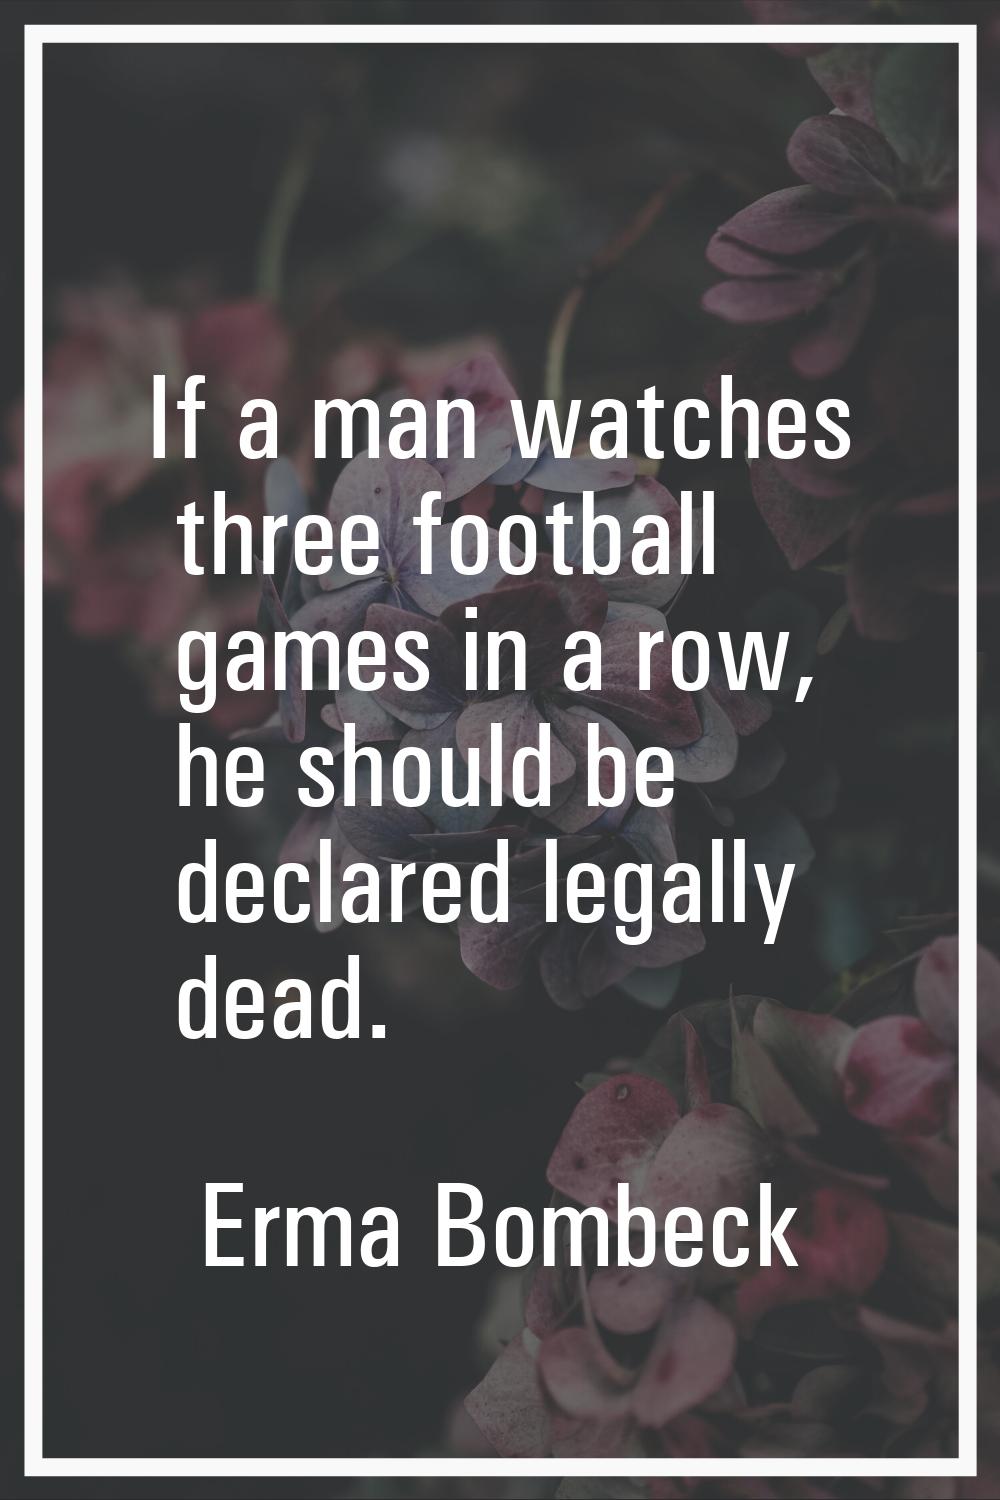 If a man watches three football games in a row, he should be declared legally dead.